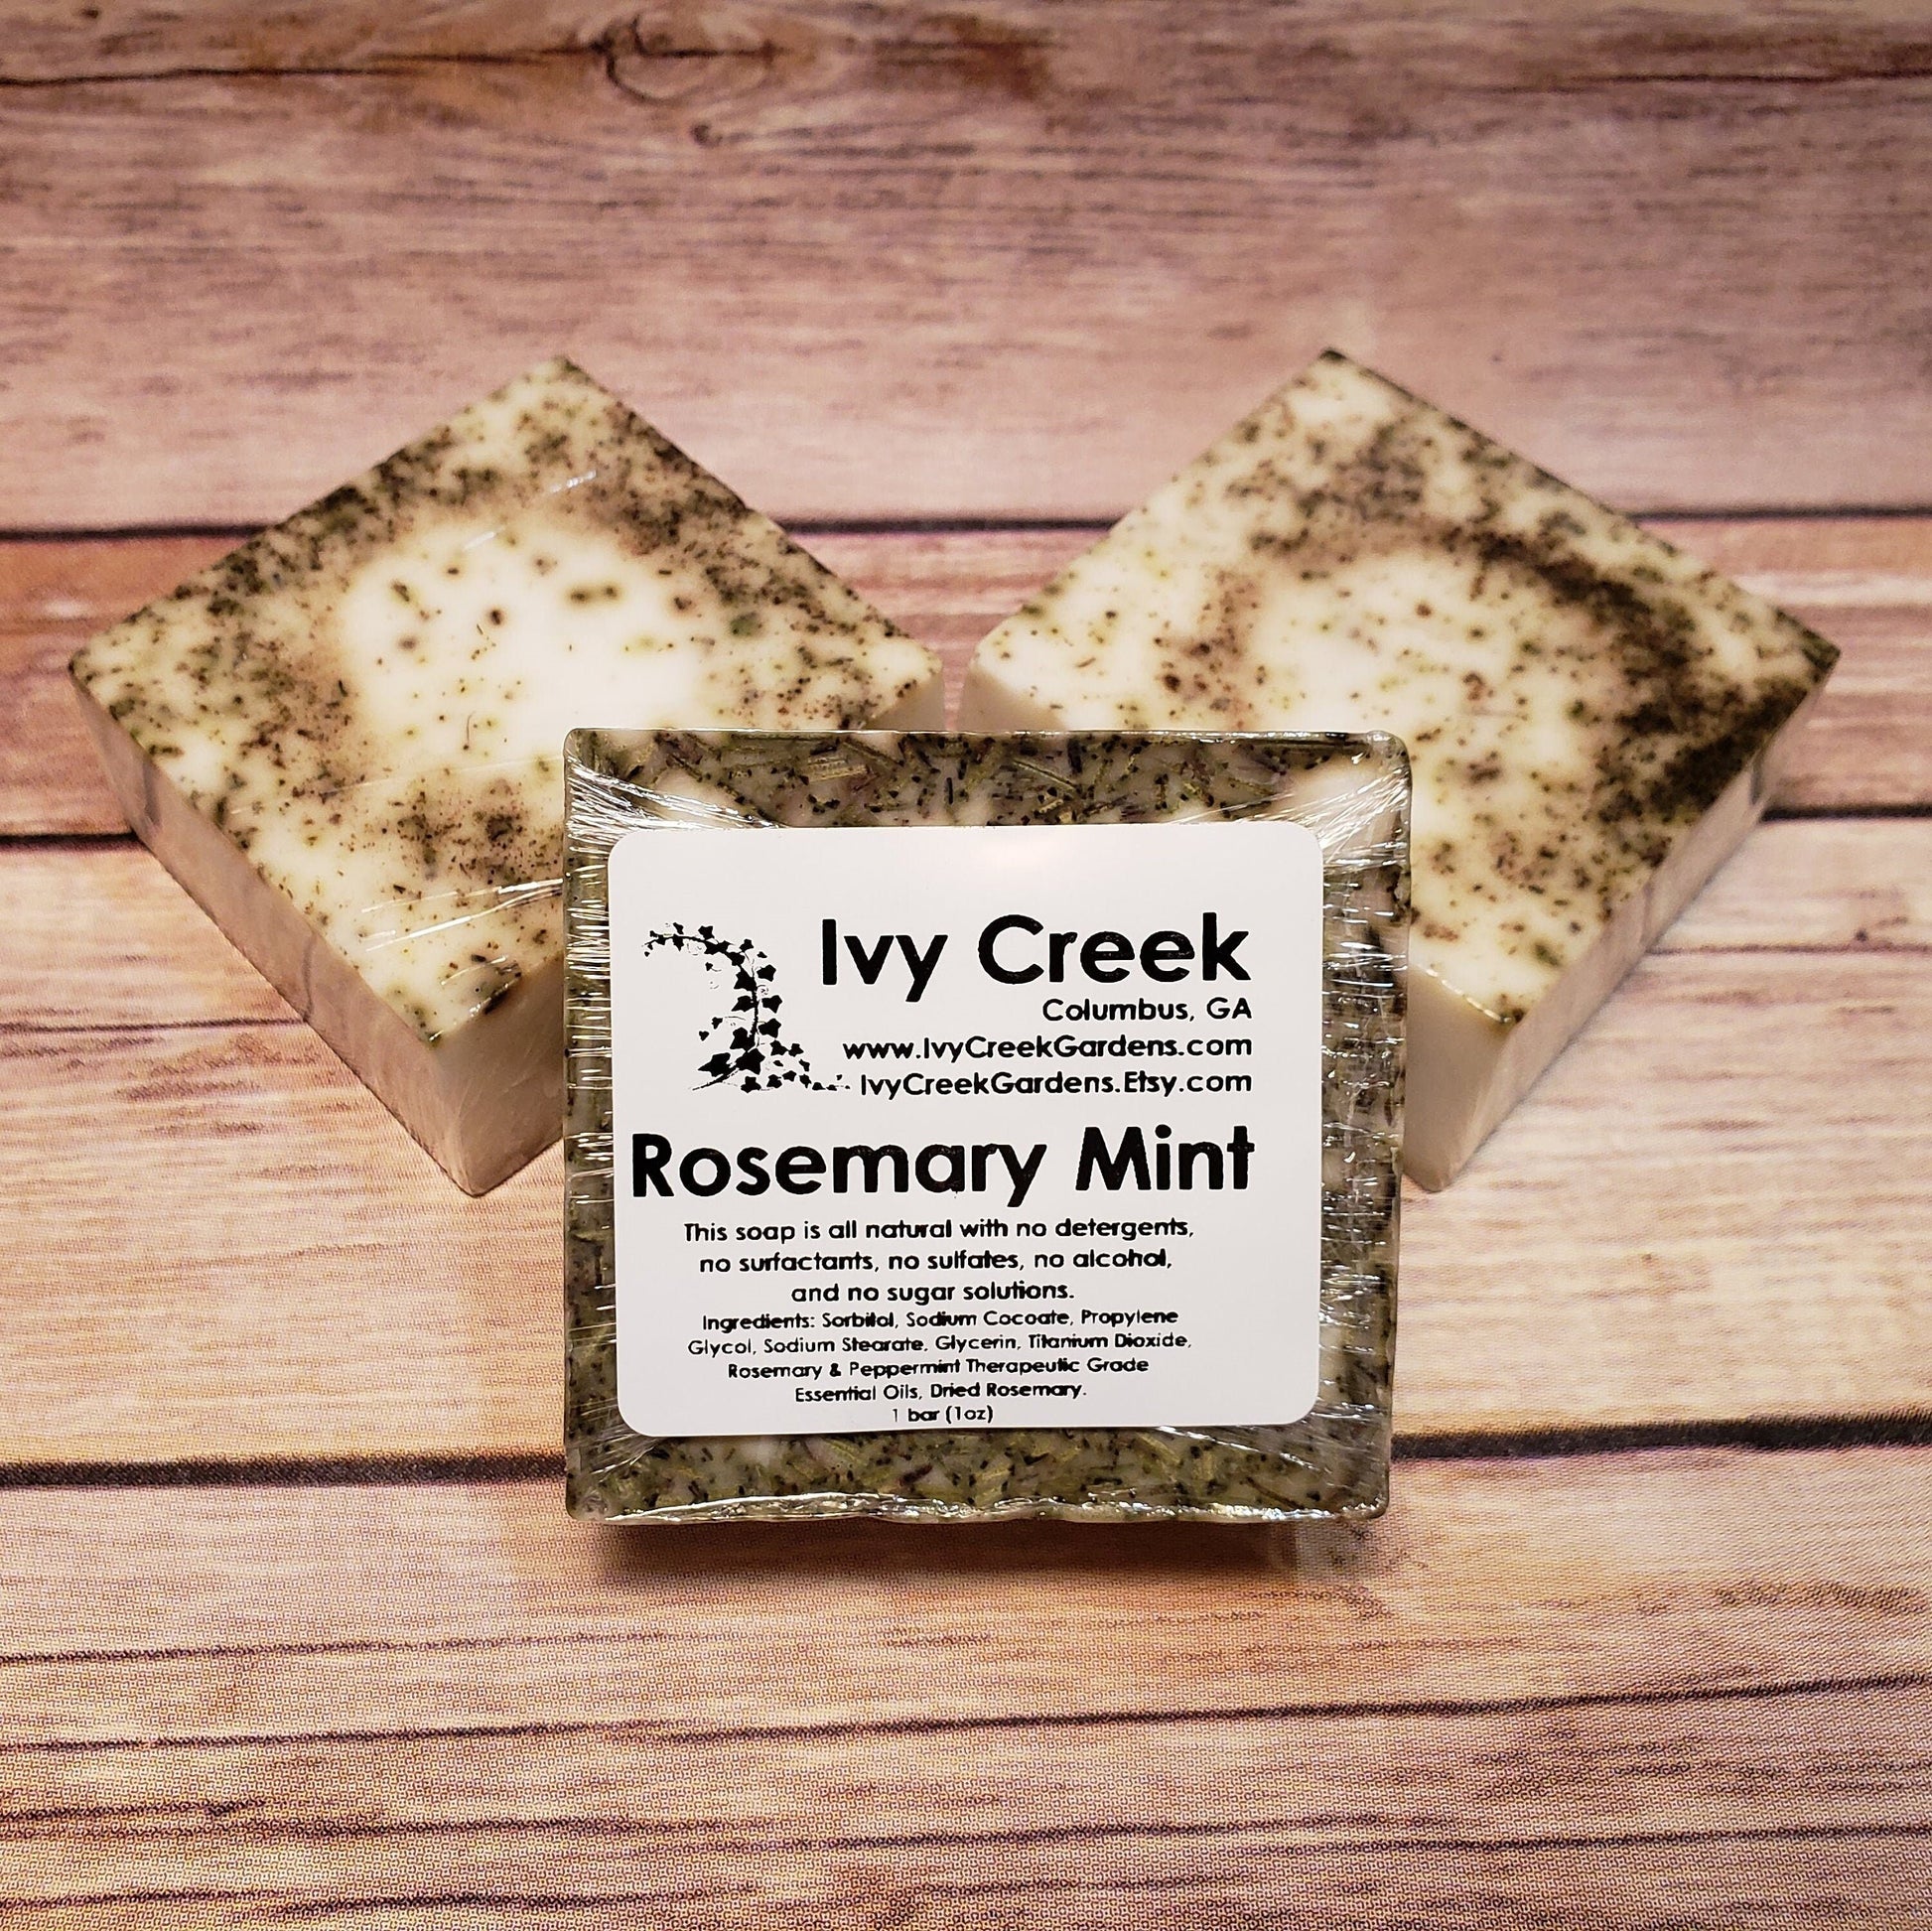 Ivy Creek Rosemary Mint Natural Bar Soap | Energizing and Refreshing | Holistic Soap Infused with Rosemary and Mint Essential Oils | 4.9 oz